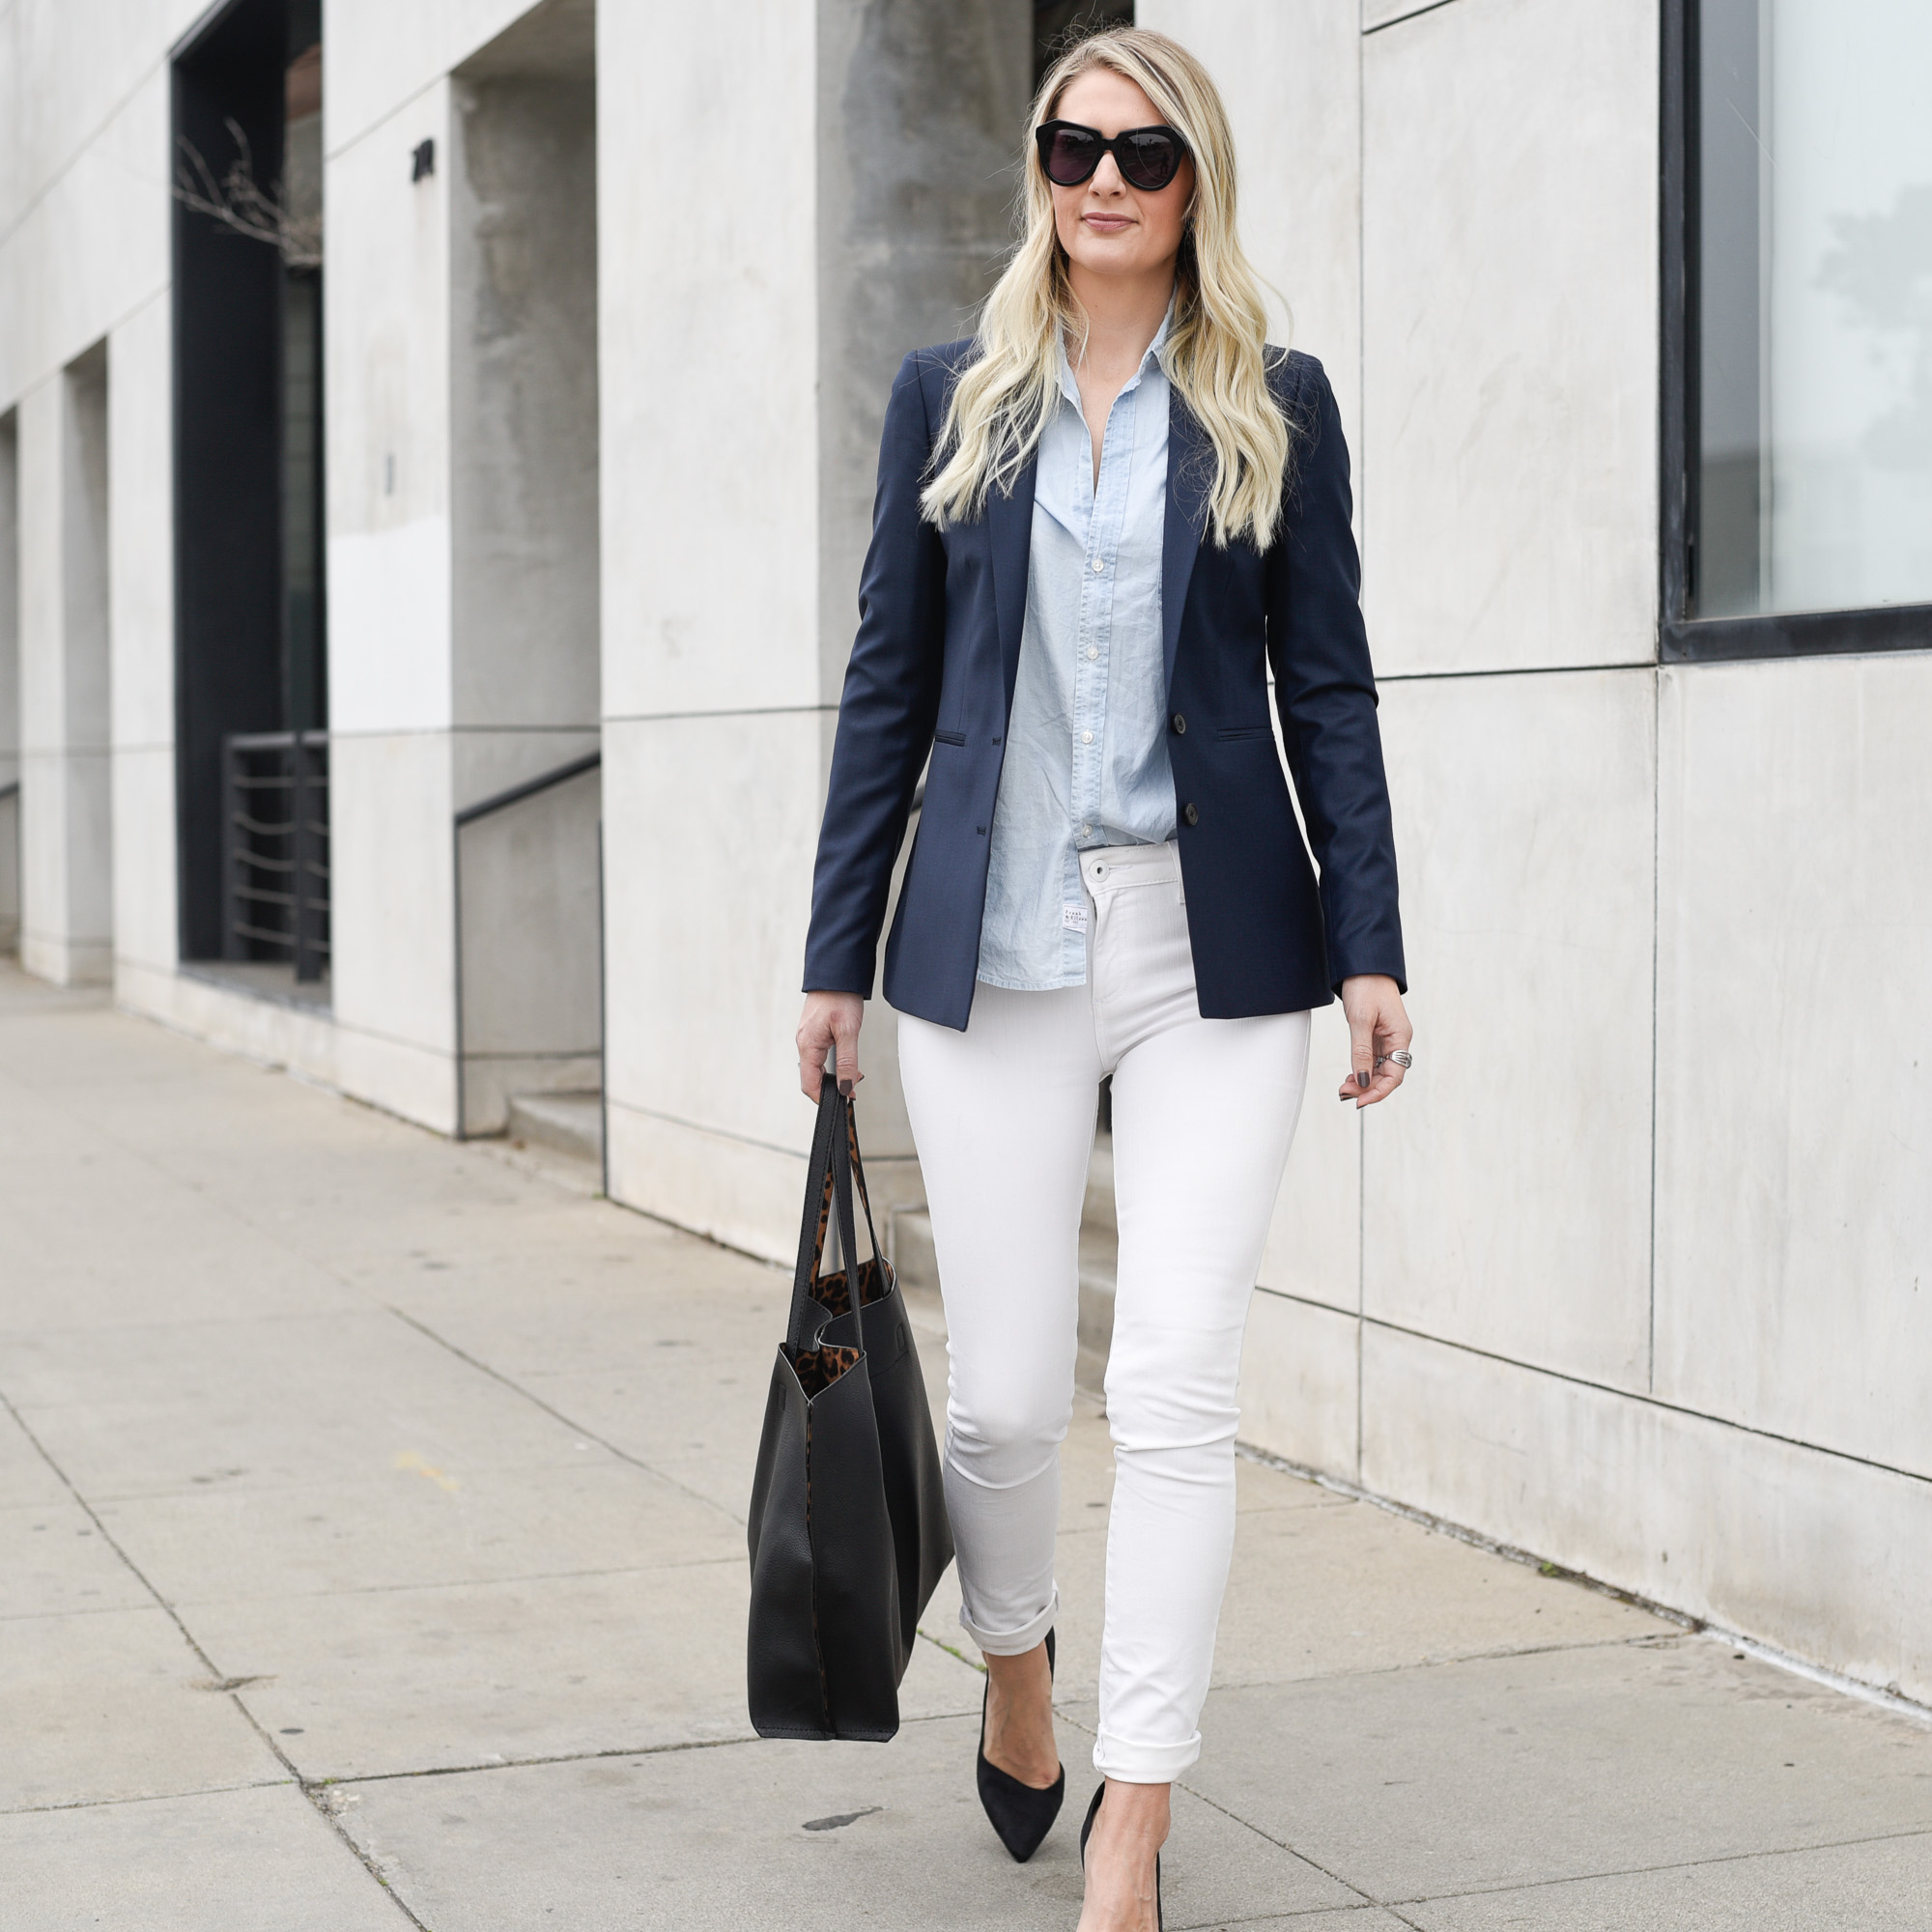 Cuff your white skinny jeans to make your outfit a little more chic.